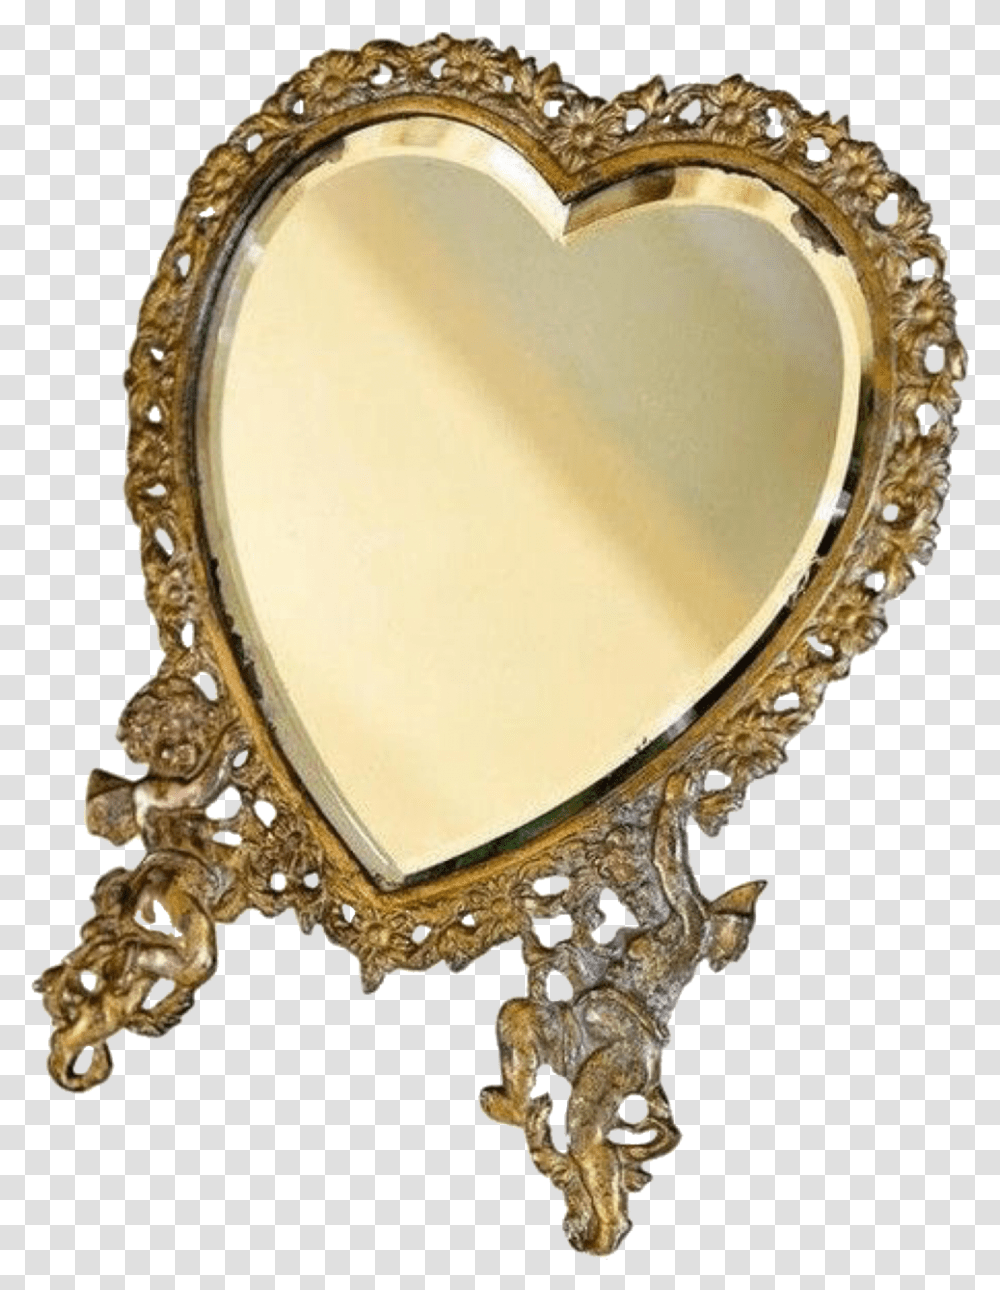 Pngs For Moodboards - Heart Mirror Victorian Aesthetic Mirrors Background Transparent Png